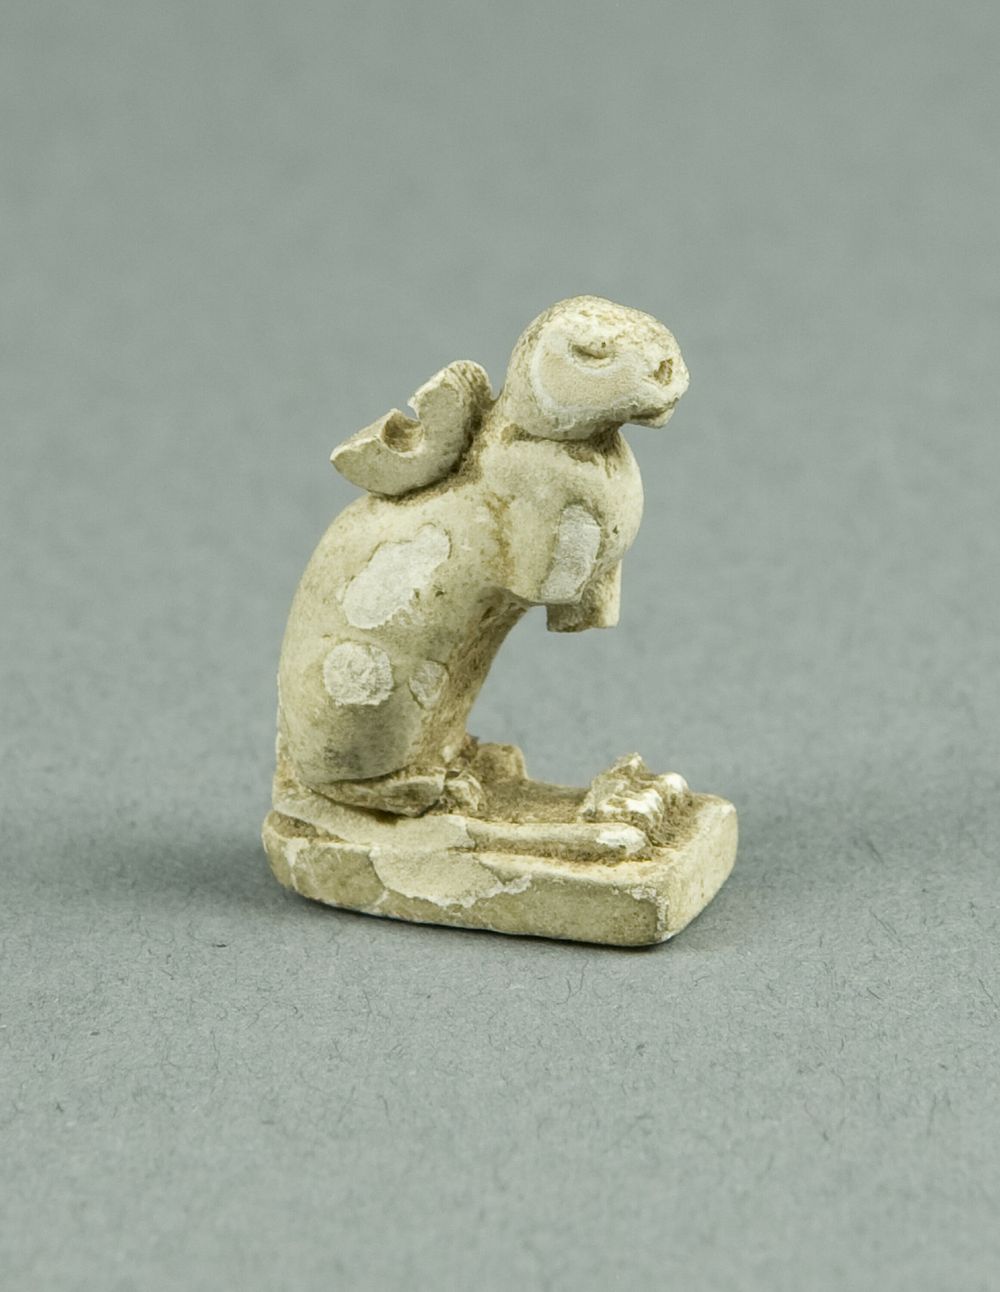 Amulet of the Goddess Bastet by Ancient Egyptian